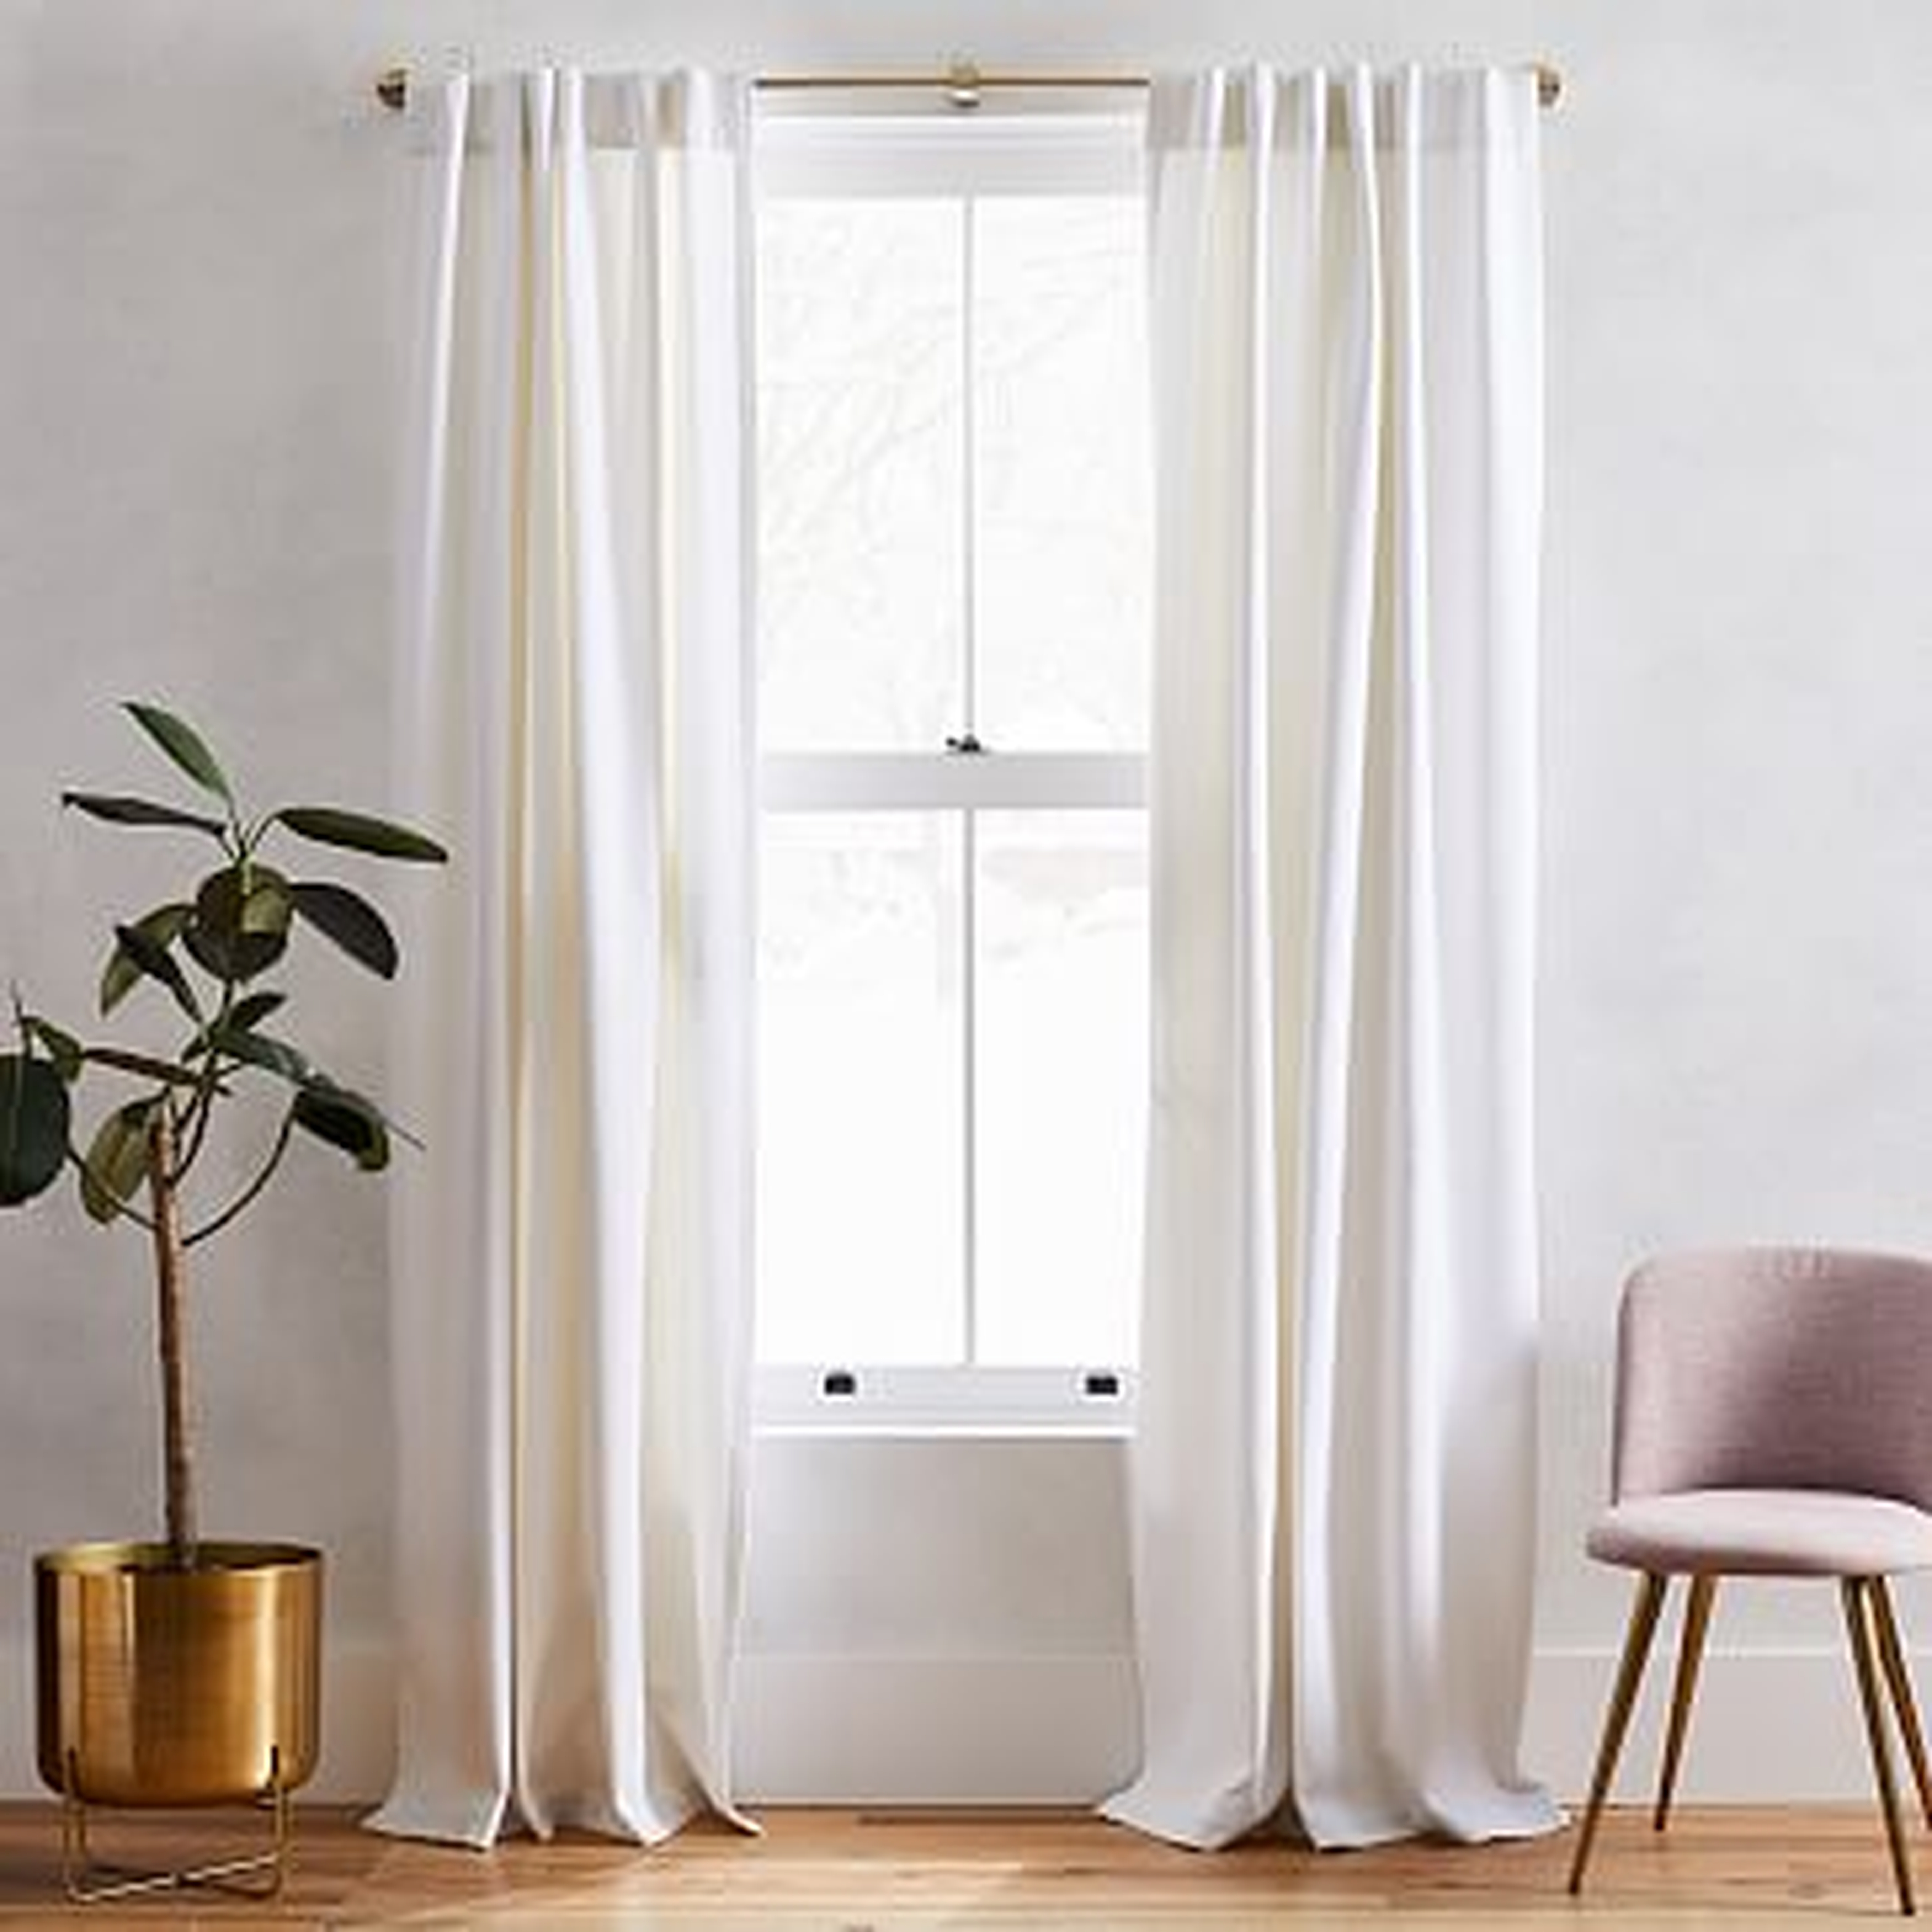 Washed Cotton Canvas Curtain, 48"x108", White, Set of 2 - West Elm